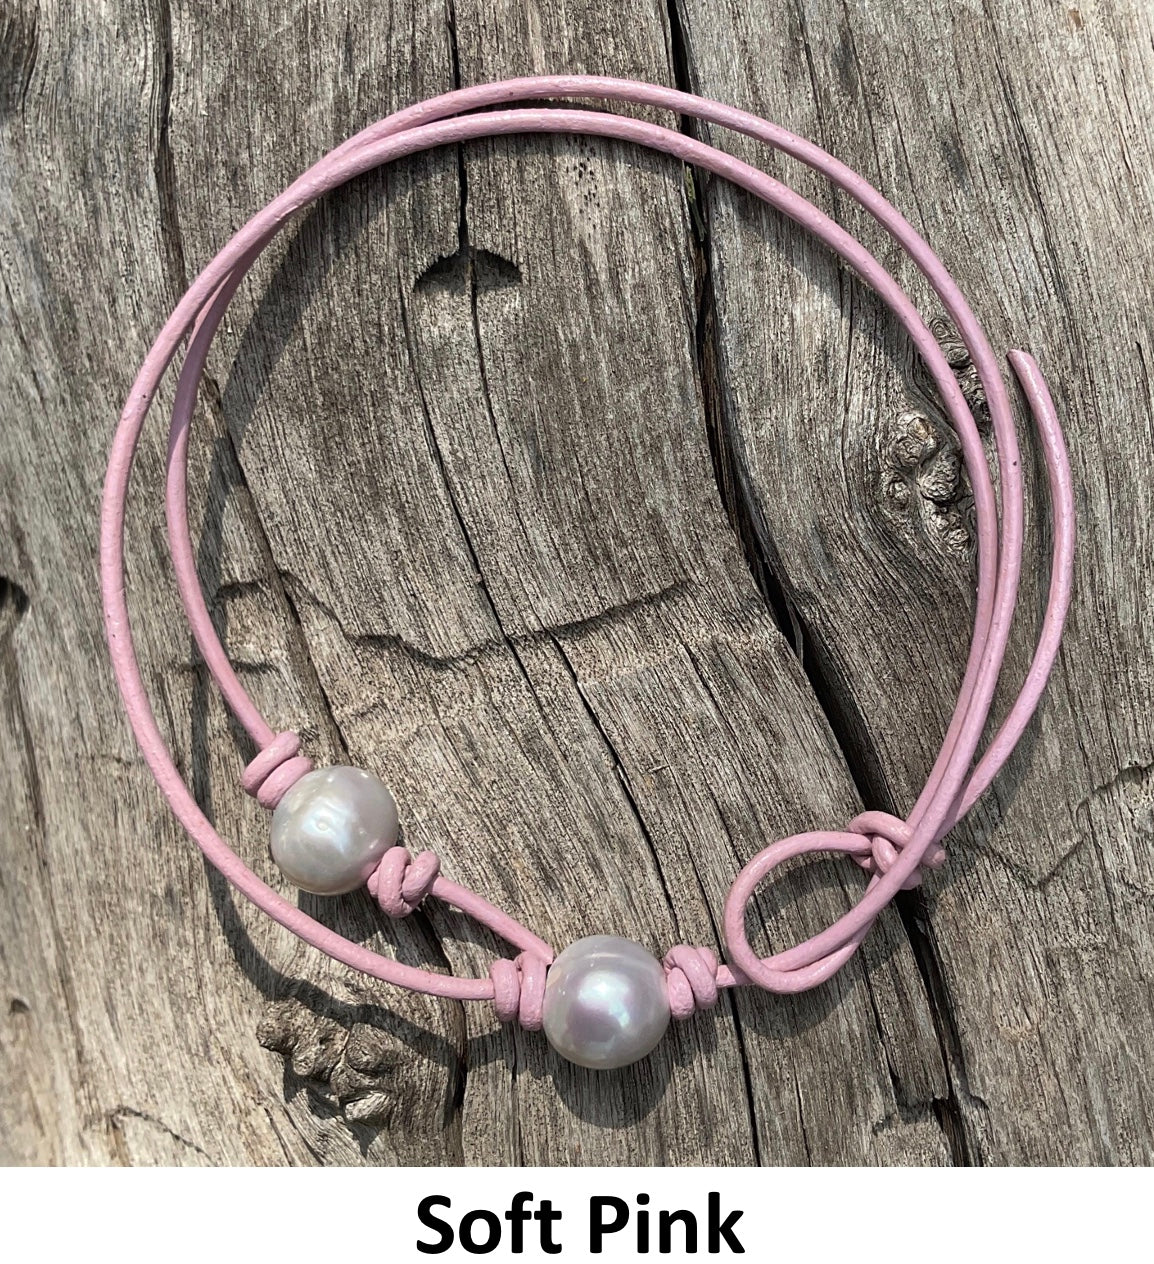 Single Gray Pearl Necklace,, #13 Soft Pink Leather Cord